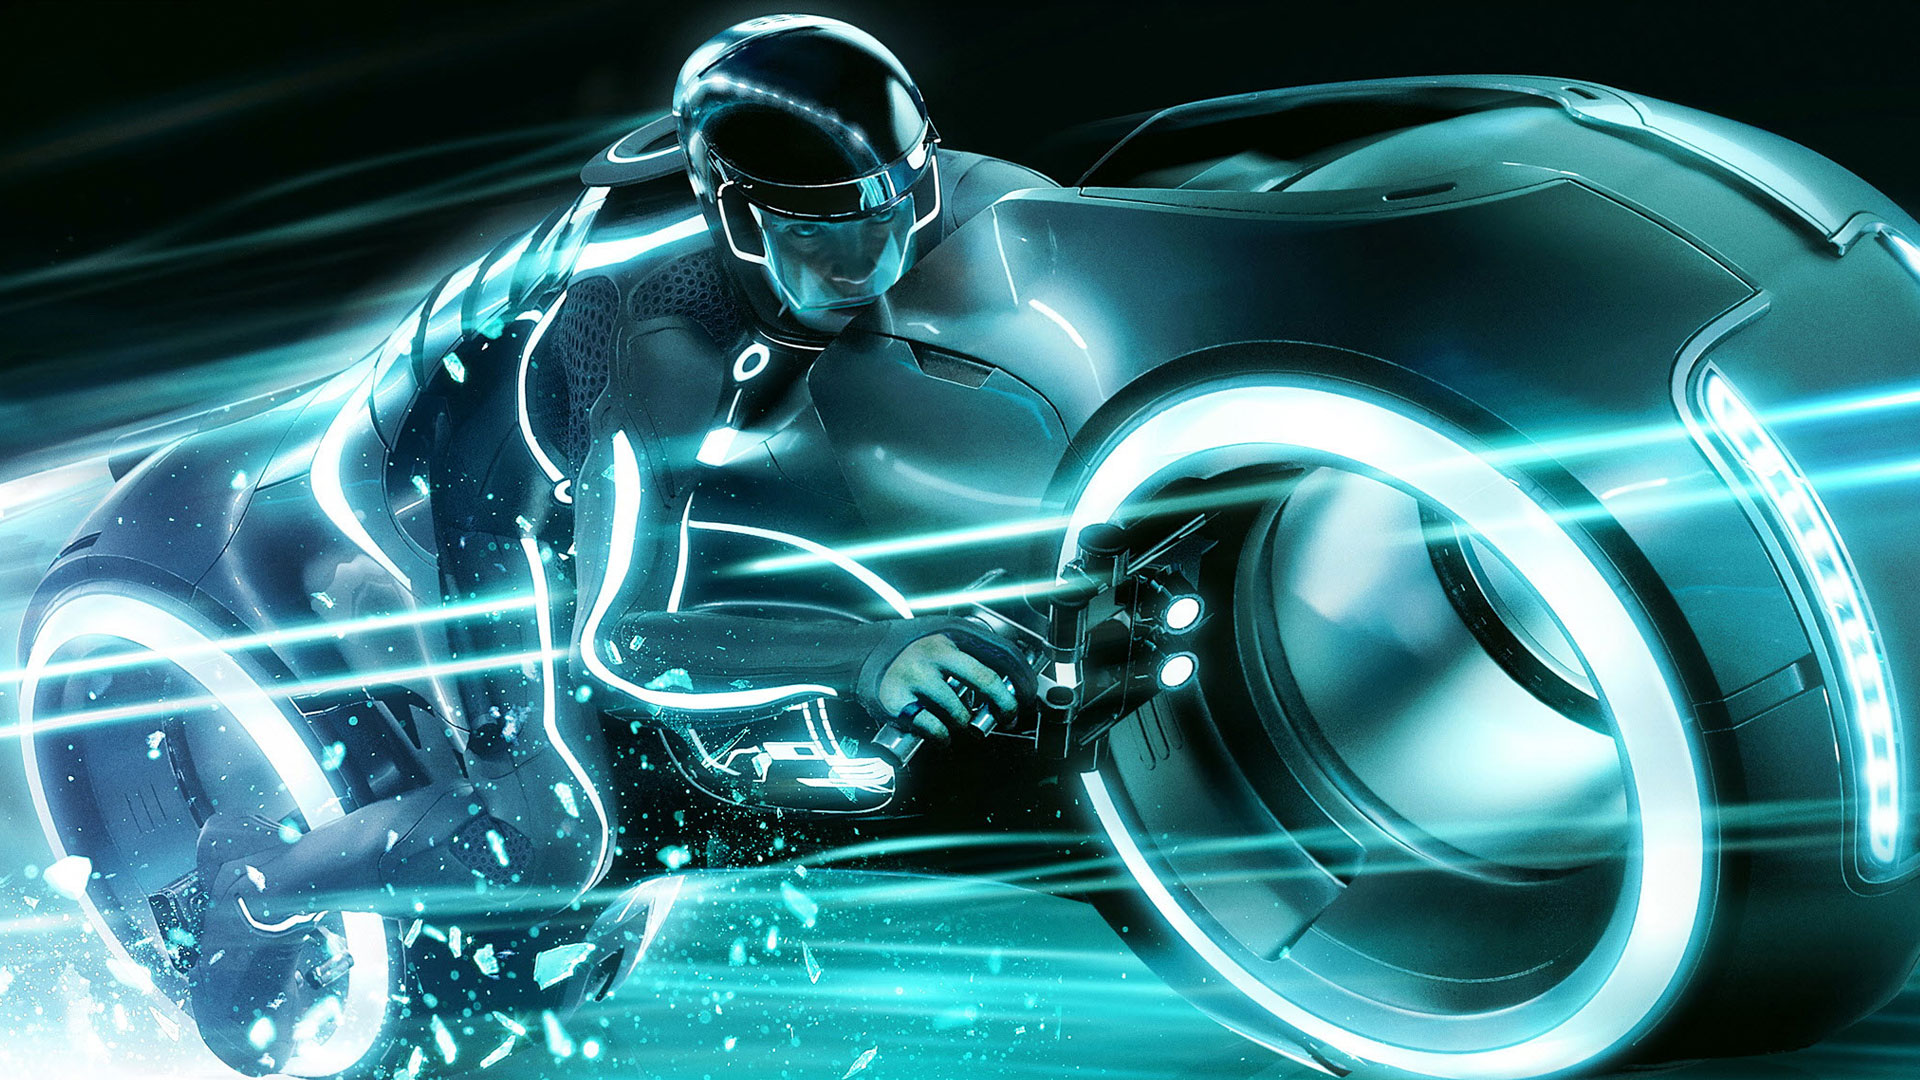 Tron Legacy HD 1080p Wallpapers HD Wallpapers 1920x1080